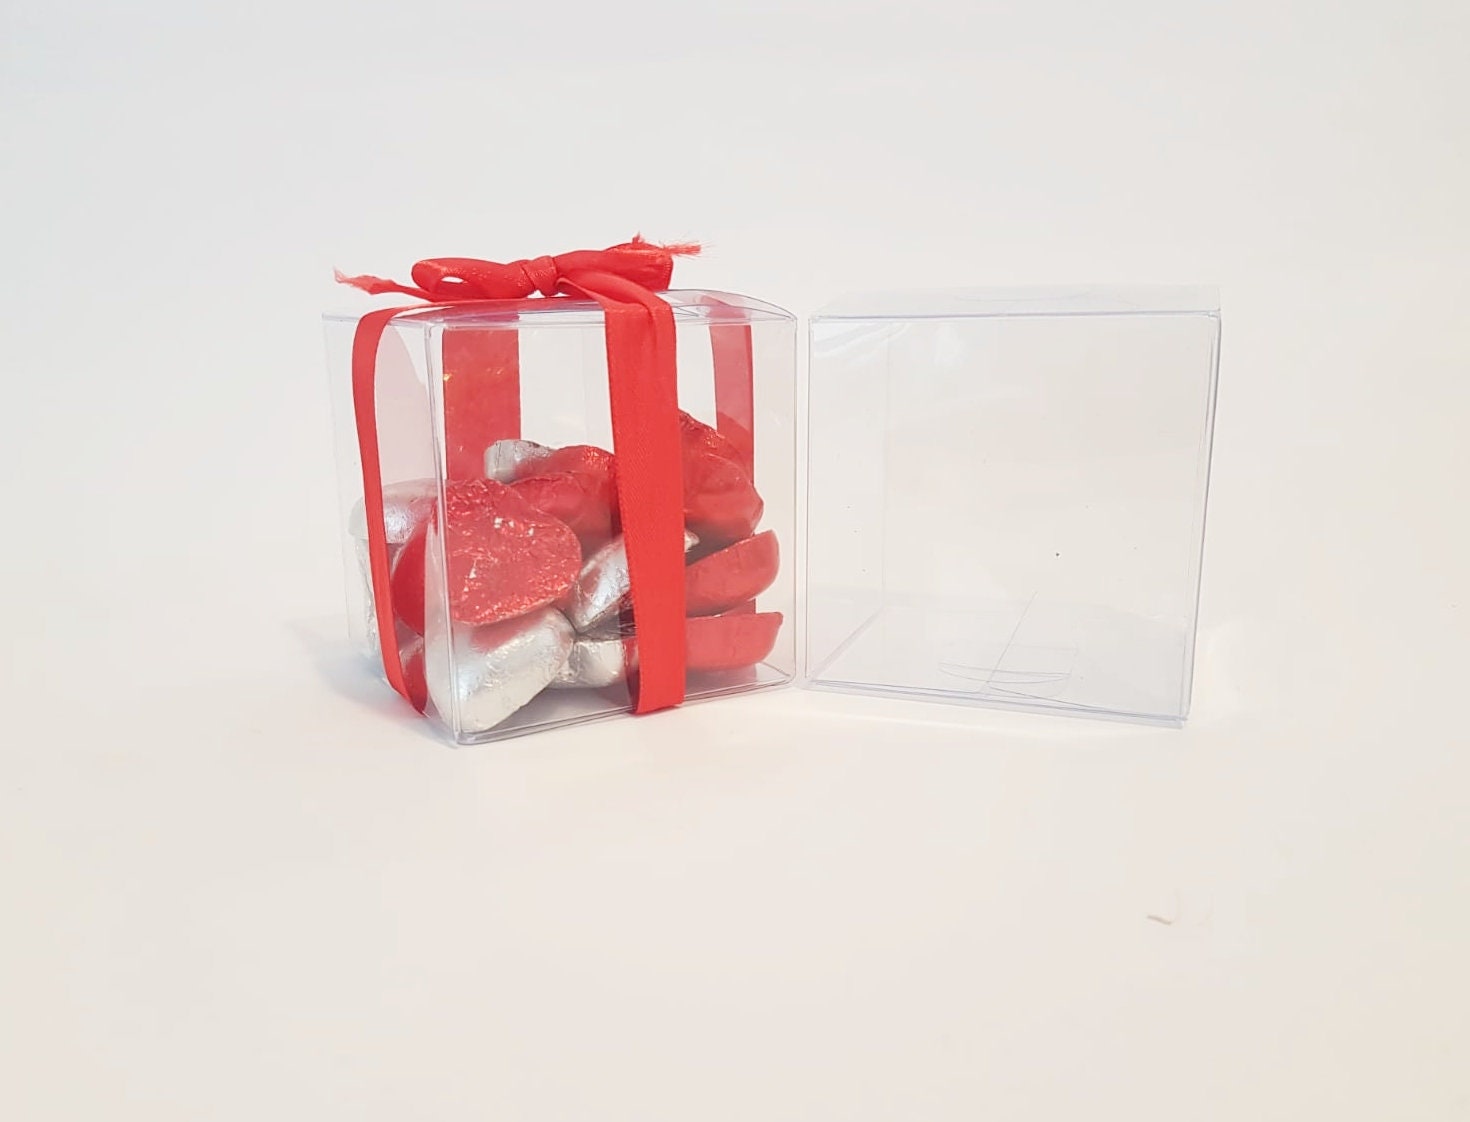 3 X 3 X 3 Clear Boxes, Wedding Favor Boxes, Gift Box, See Through